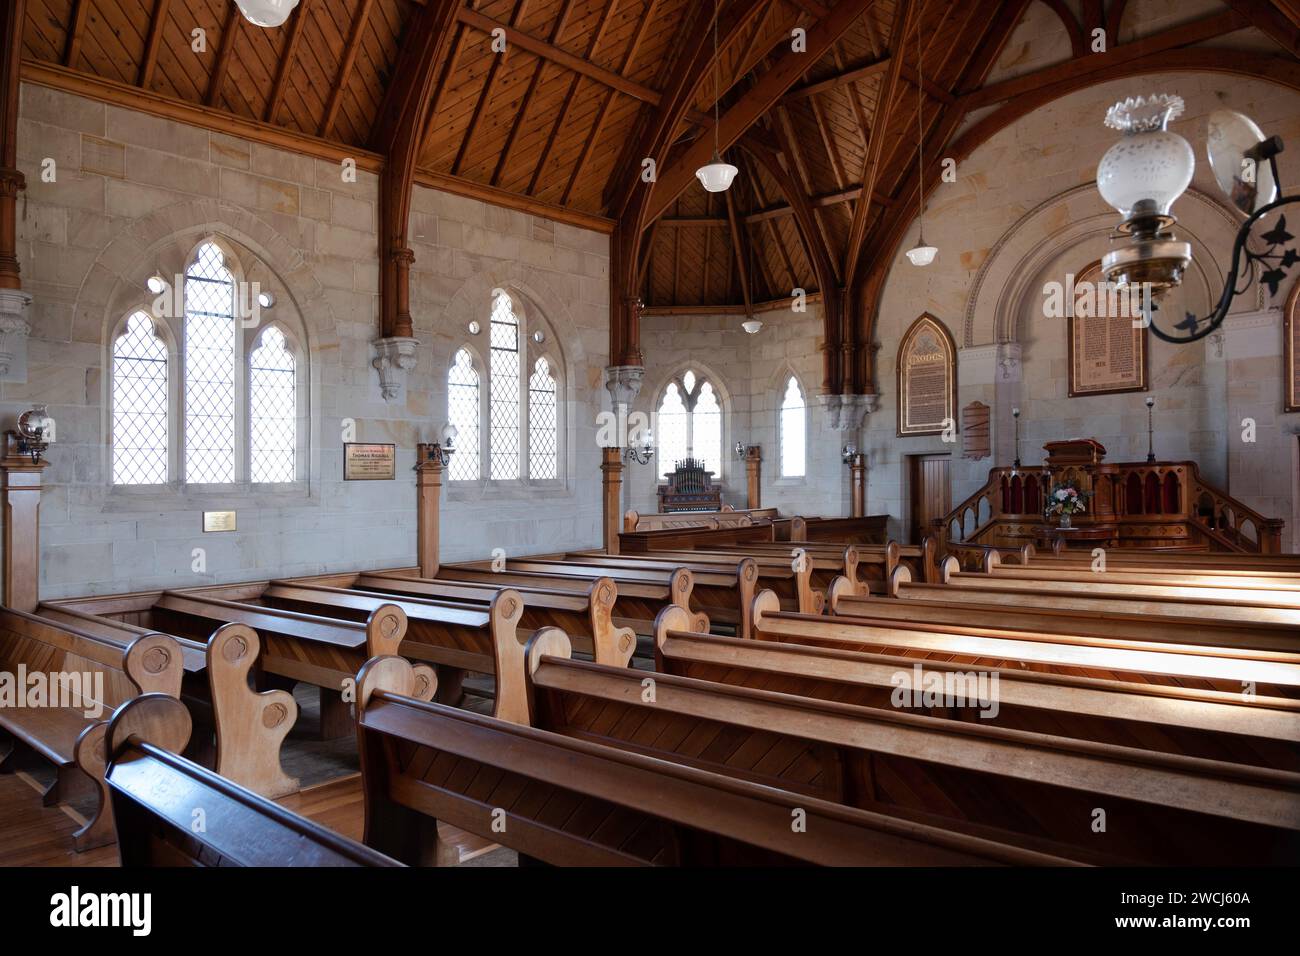 Interior with pews of the Gothic style stone Uniting Church (The Methodist Church) in Ross, Australia Stock Photo